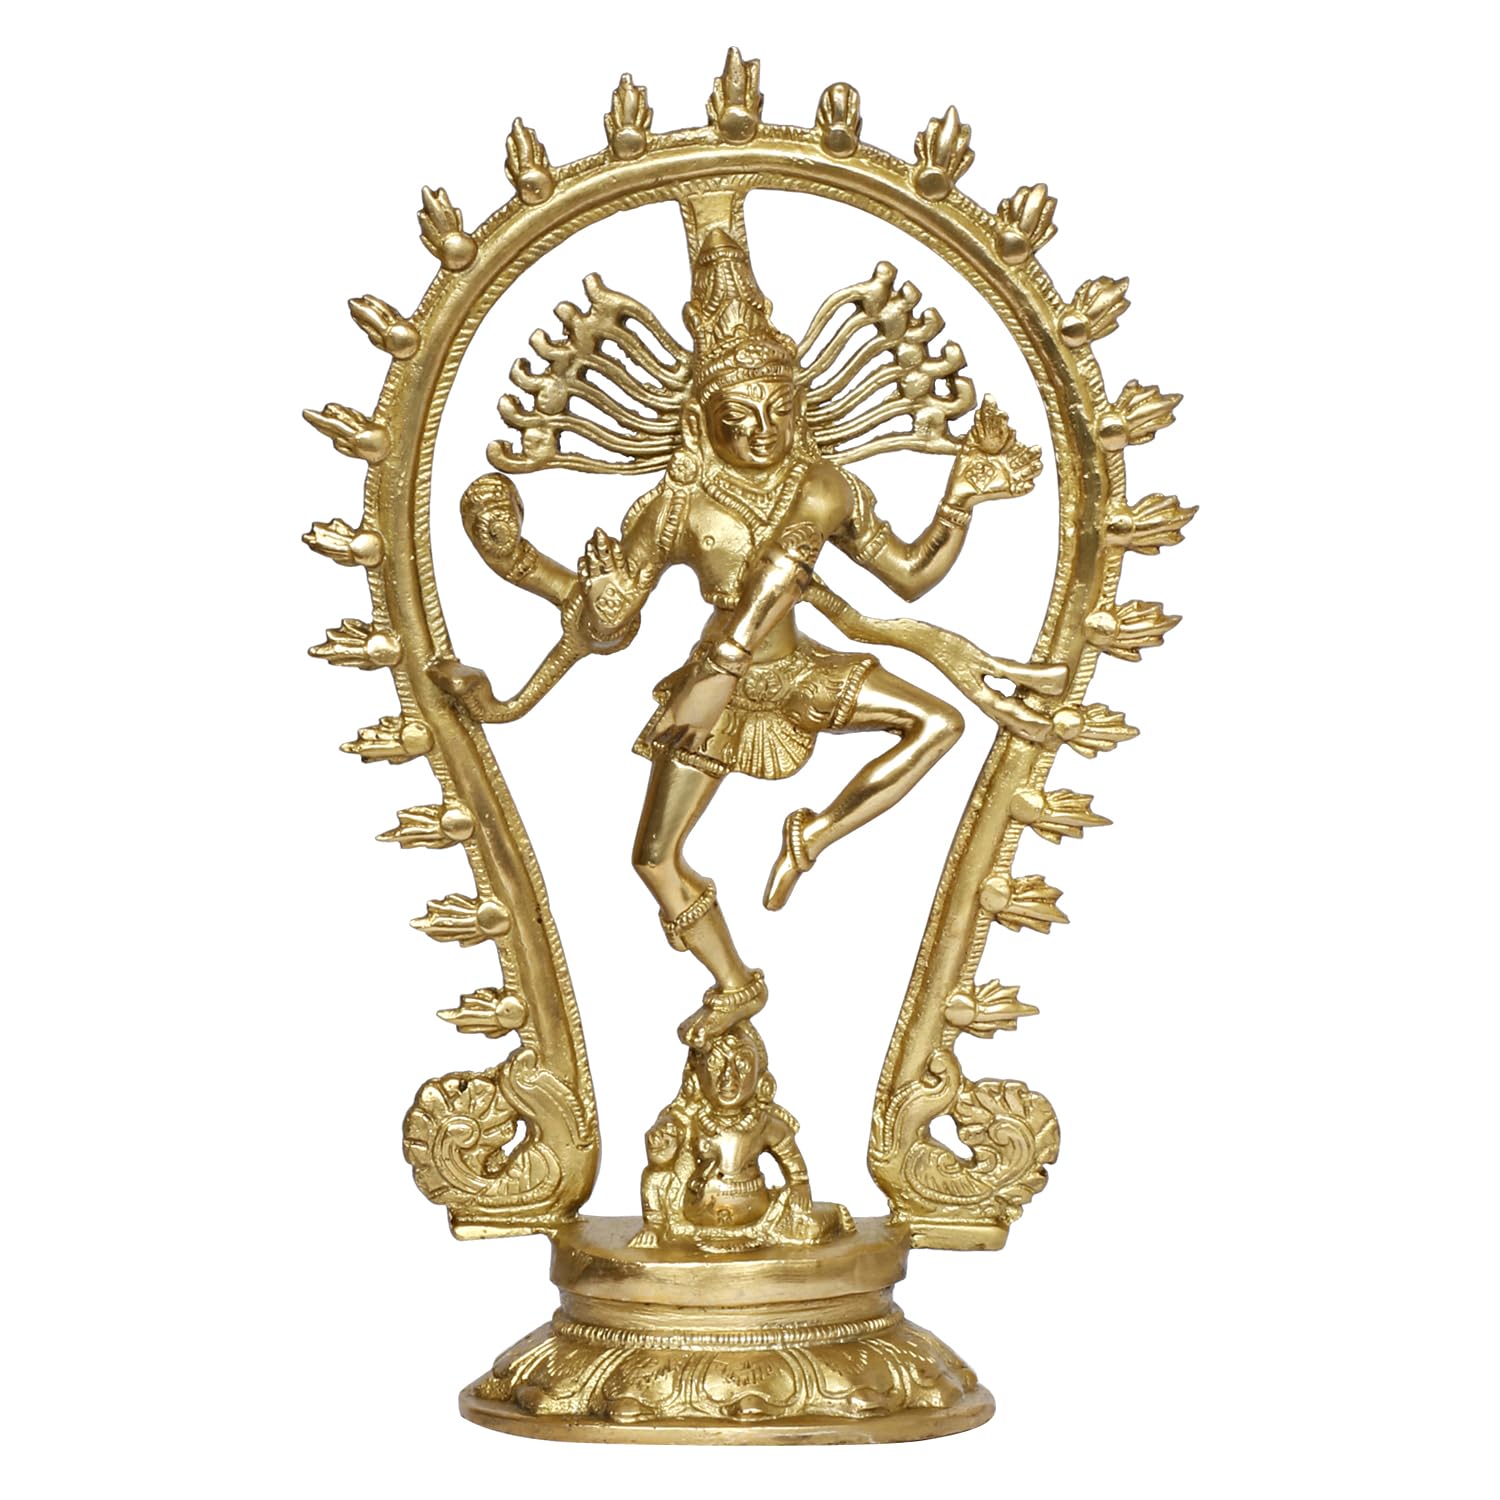 Kartique Brass Nataraj Idol for Home Decor in Gold Color Height 11.5 Inch-home decor-pooja room-idols-Stumbit Home